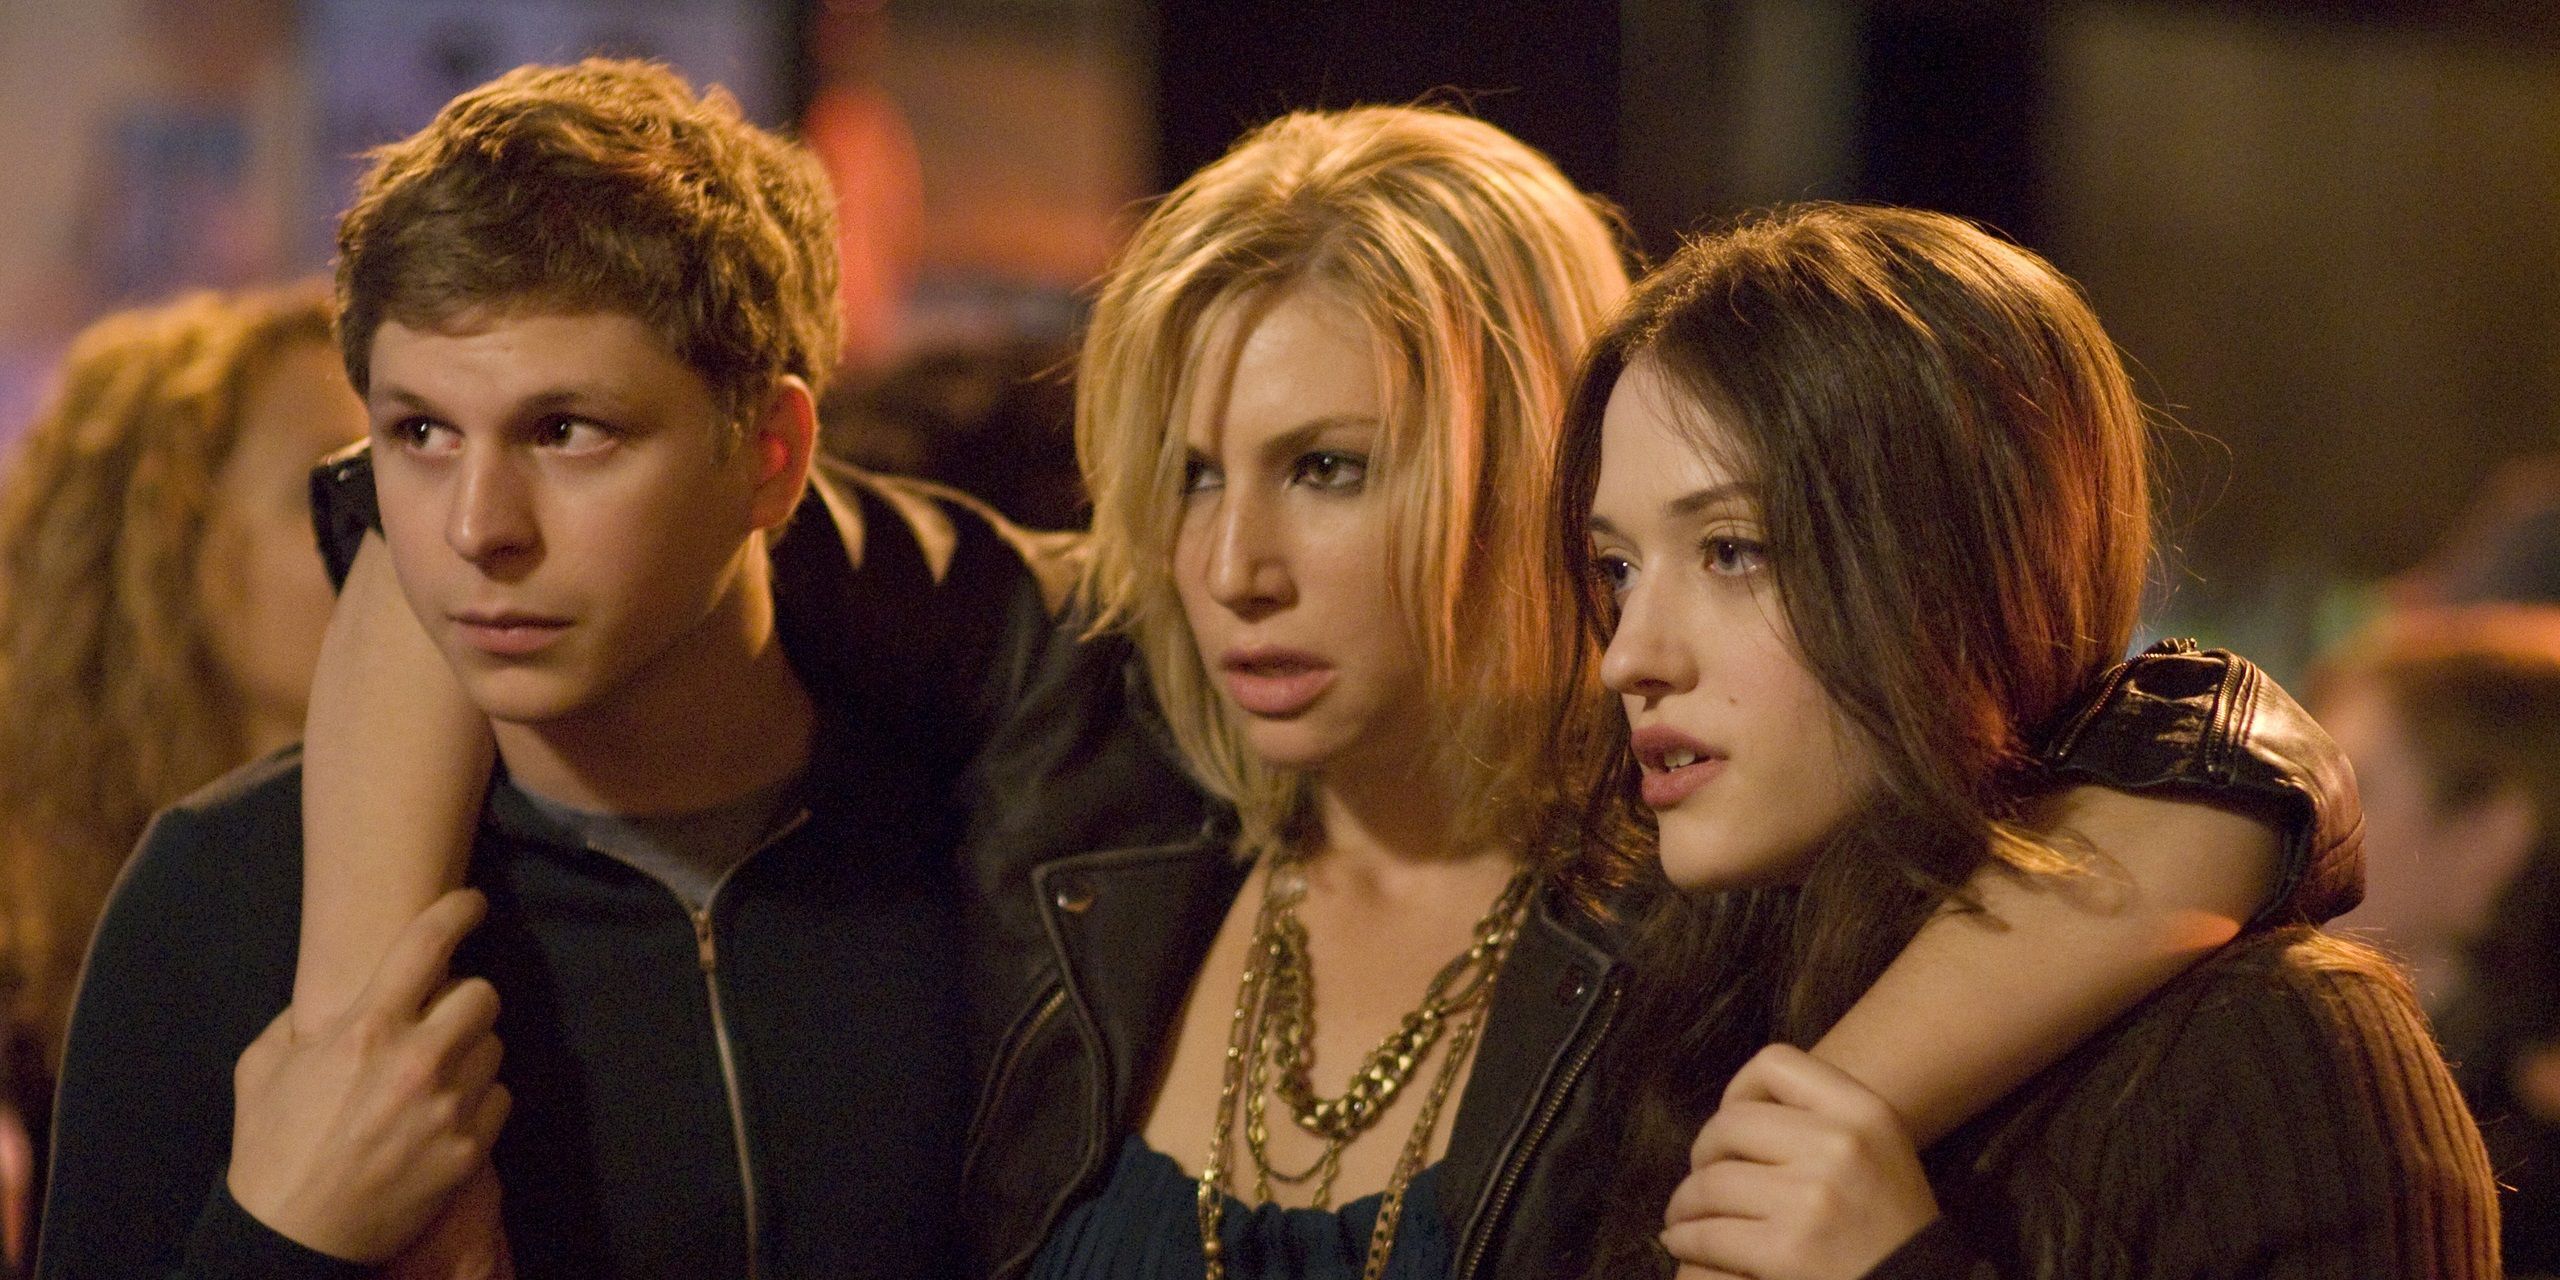 Michael Cera and Kat Dennings' characters holding up Ari Graynor's in Nick and Norah's Infinite Playlist